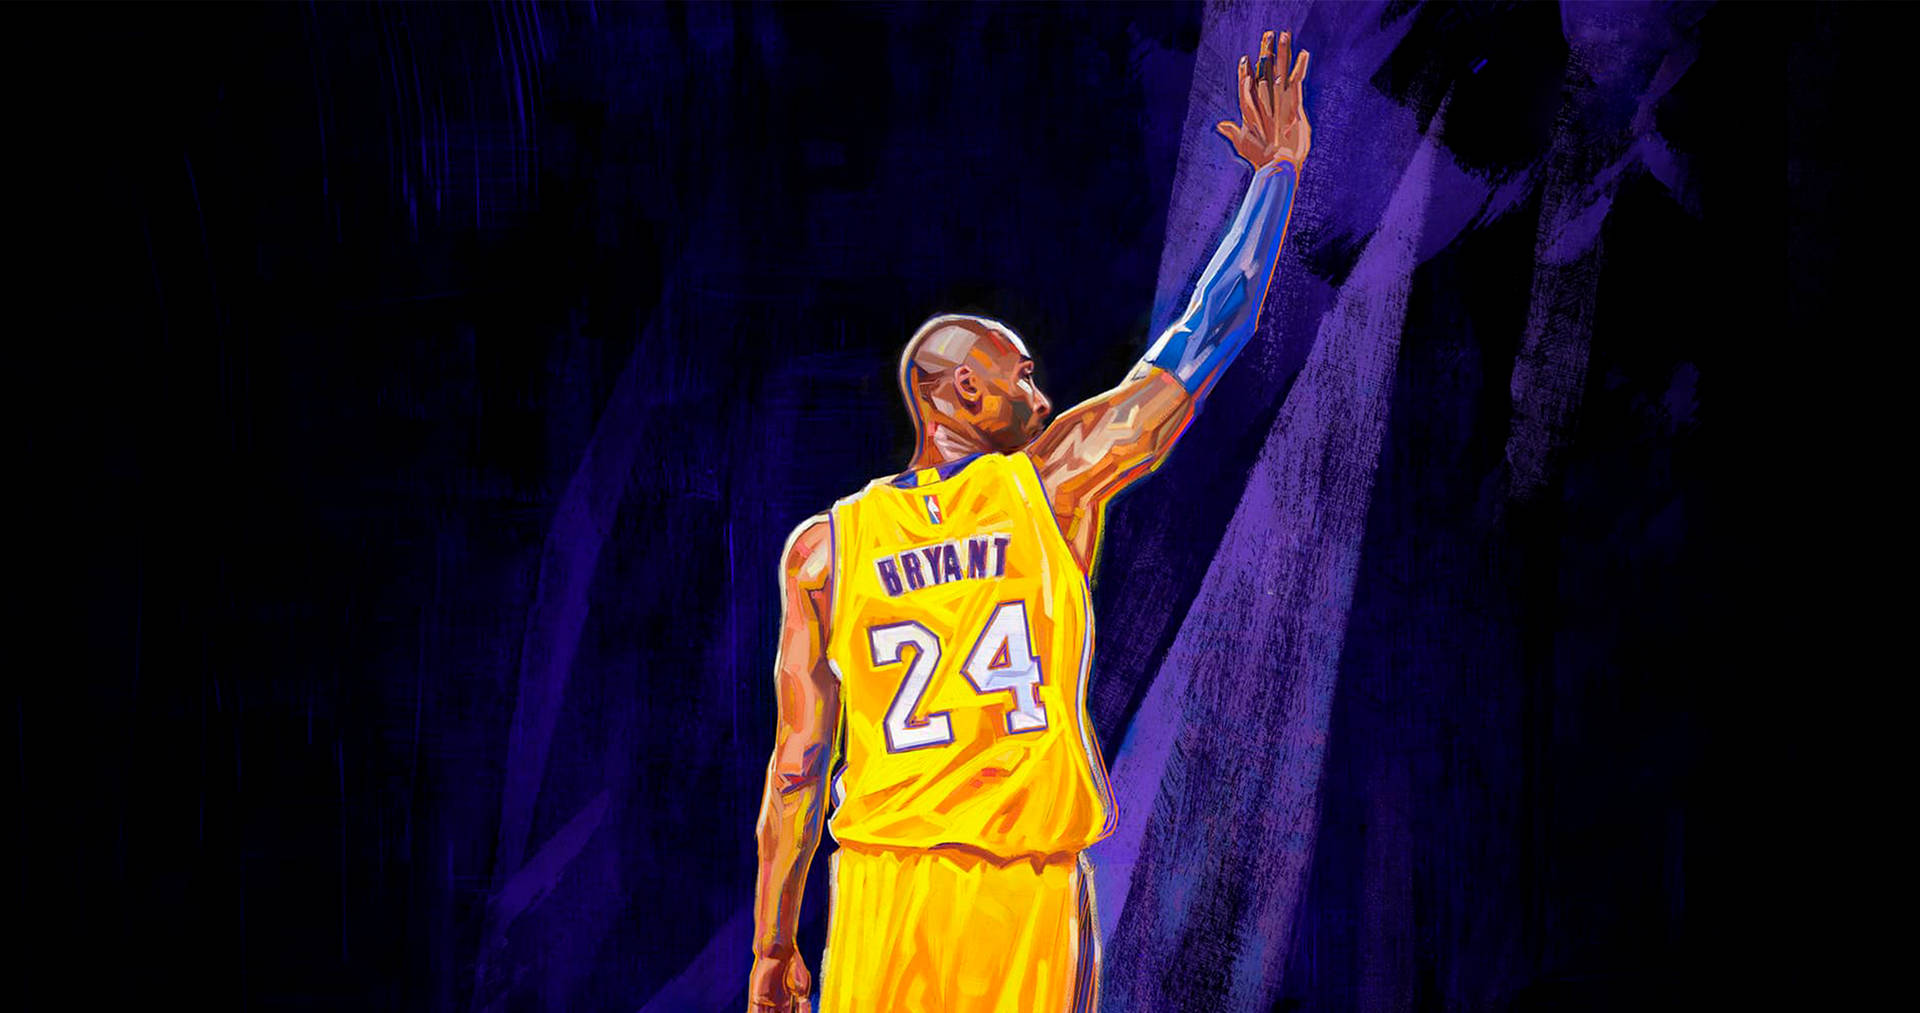 300+] Kobe Bryant Wallpapers for FREE 